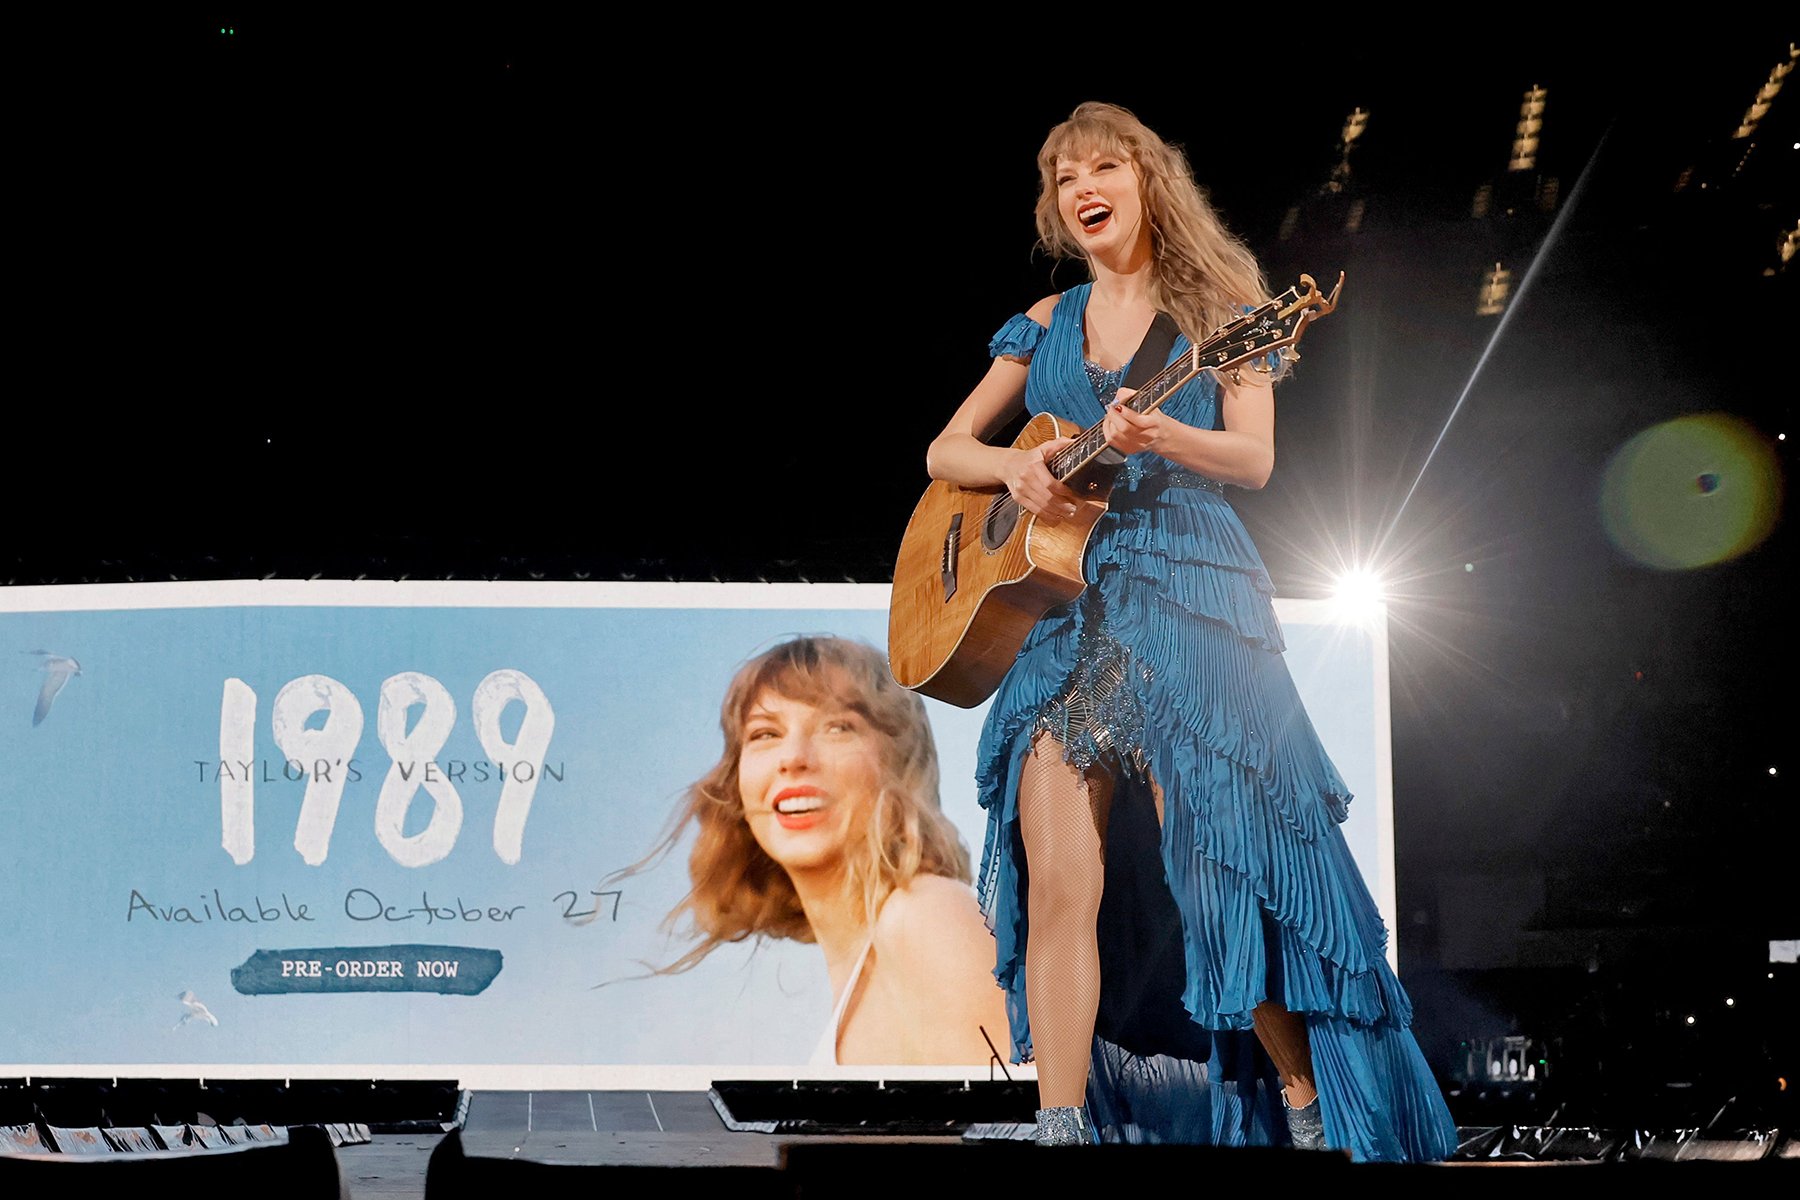 1989' Streams Spike After Taylor Swift Announces 'Taylor's Version'